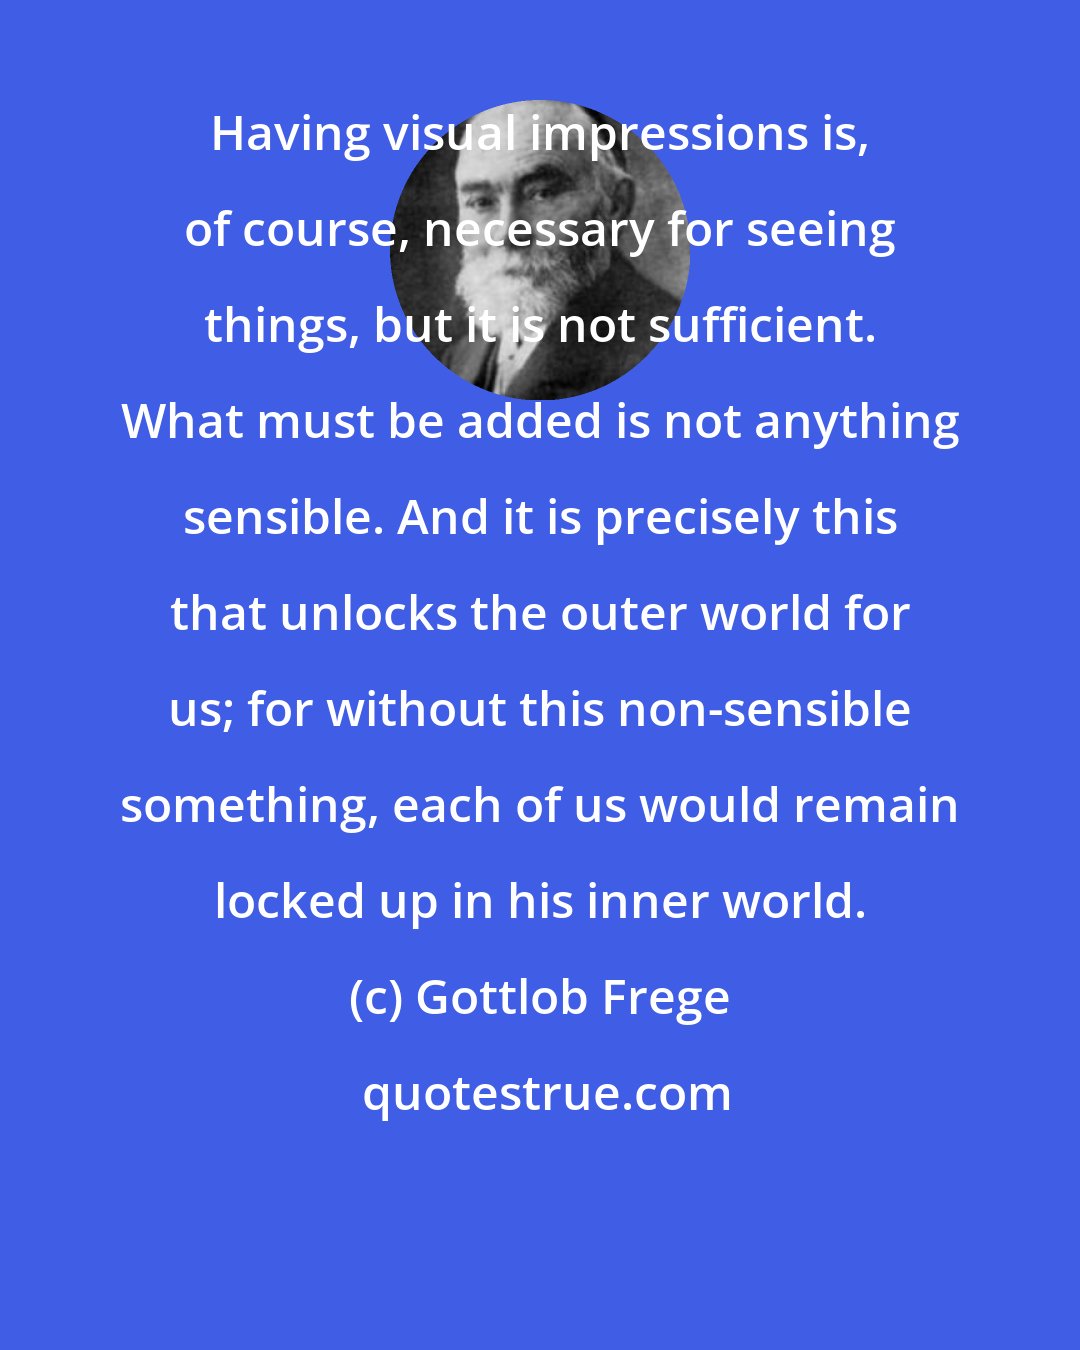 Gottlob Frege: Having visual impressions is, of course, necessary for seeing things, but it is not sufficient. What must be added is not anything sensible. And it is precisely this that unlocks the outer world for us; for without this non-sensible something, each of us would remain locked up in his inner world.